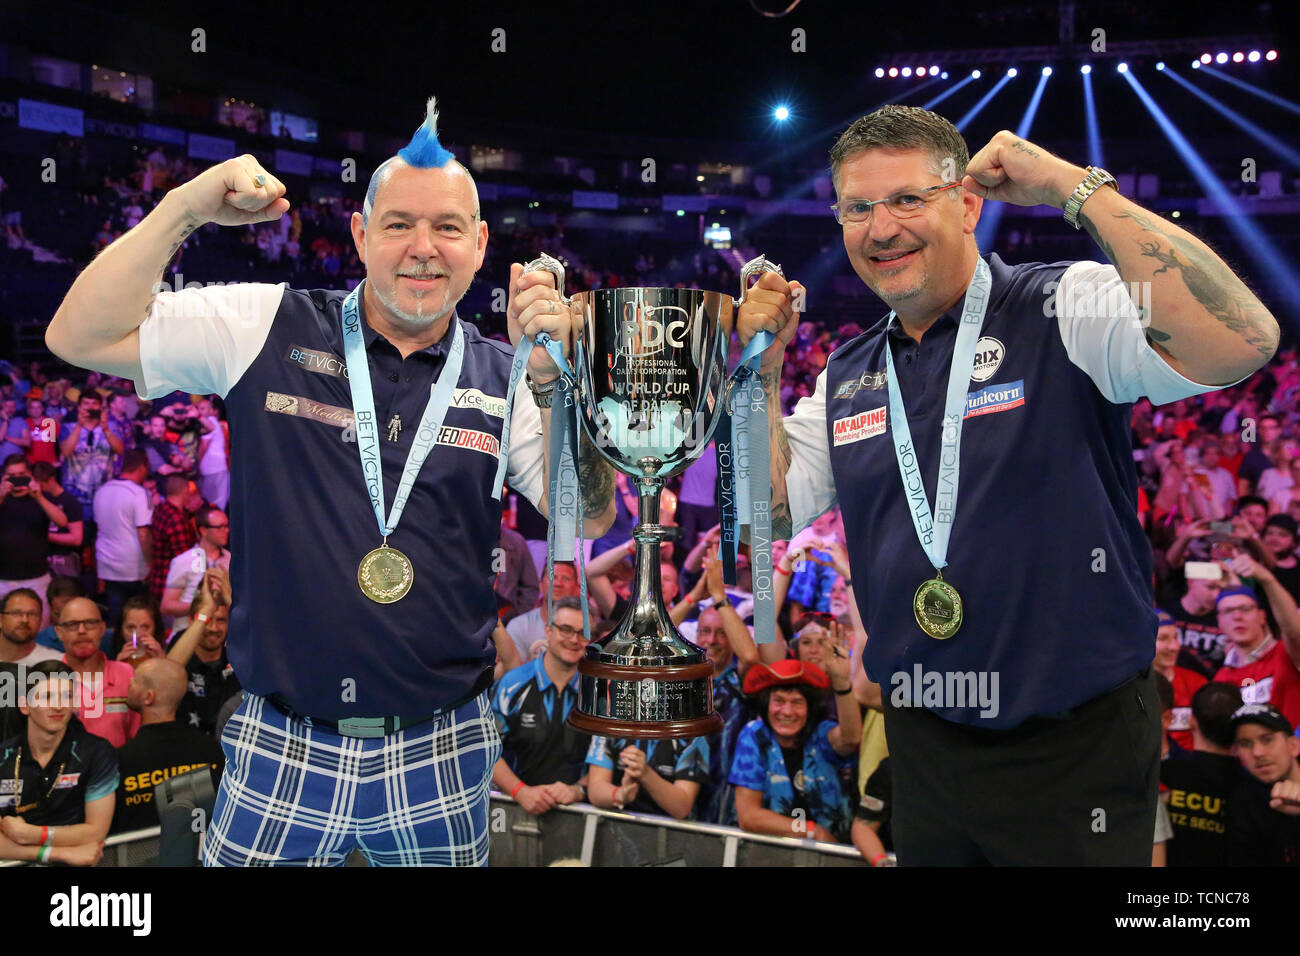 Hamburg, Germany. 09th June, 2019. Darts: Team World Championship, Final: Scotland - Ireland. The winning team Peter Wright (l) and Gary Anderson from Scotland pose with their trophy after the victory. Credit: Bodo Marks/dpa/Alamy Live News Stock Photo